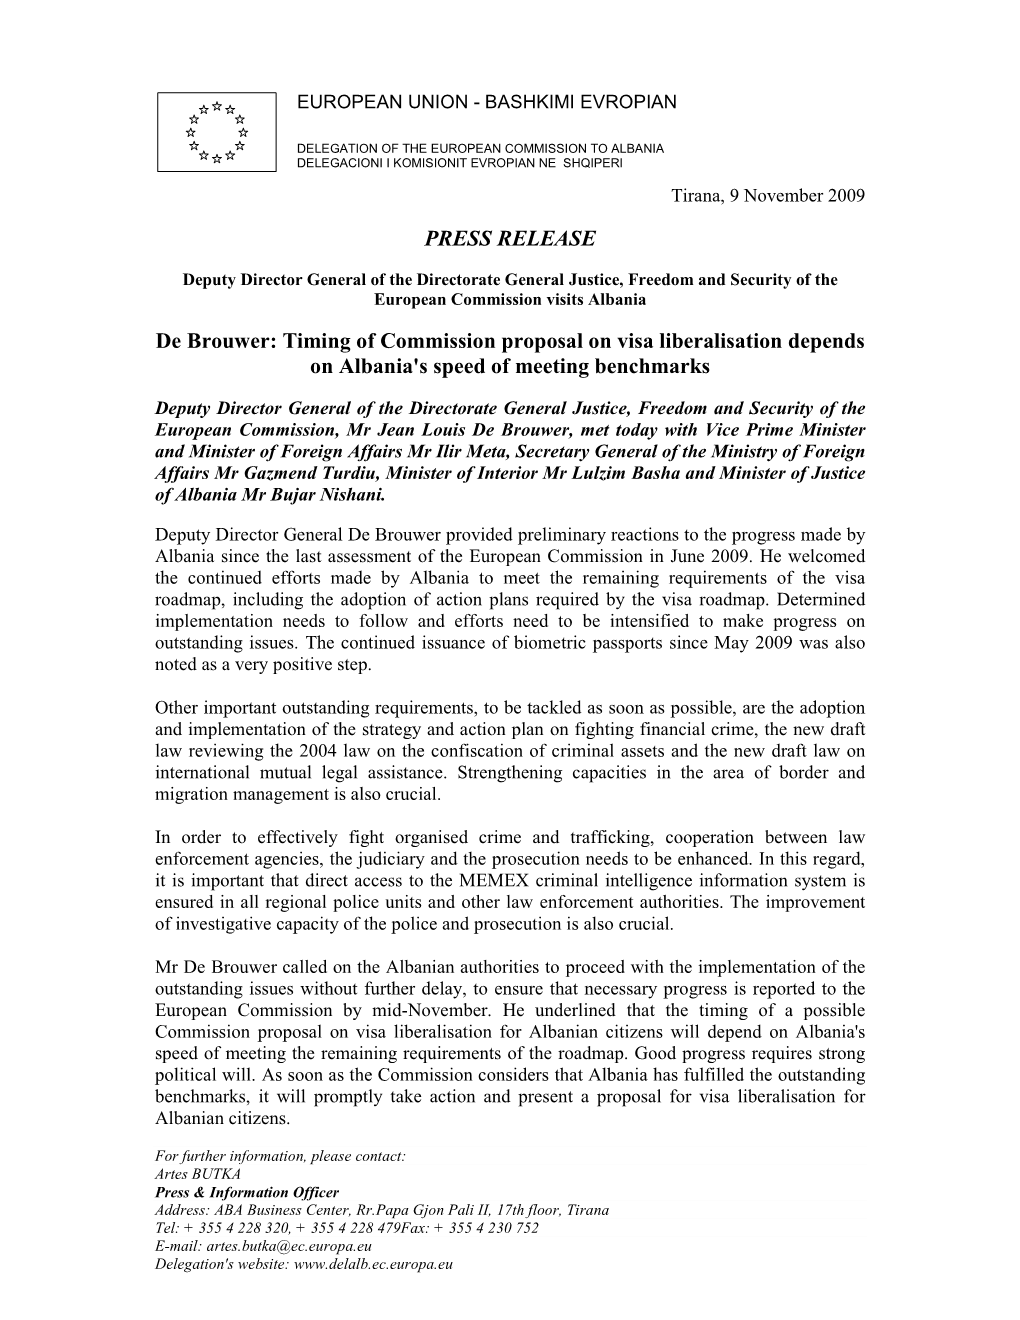 PRESS RELEASE De Brouwer: Timing of Commission Proposal On